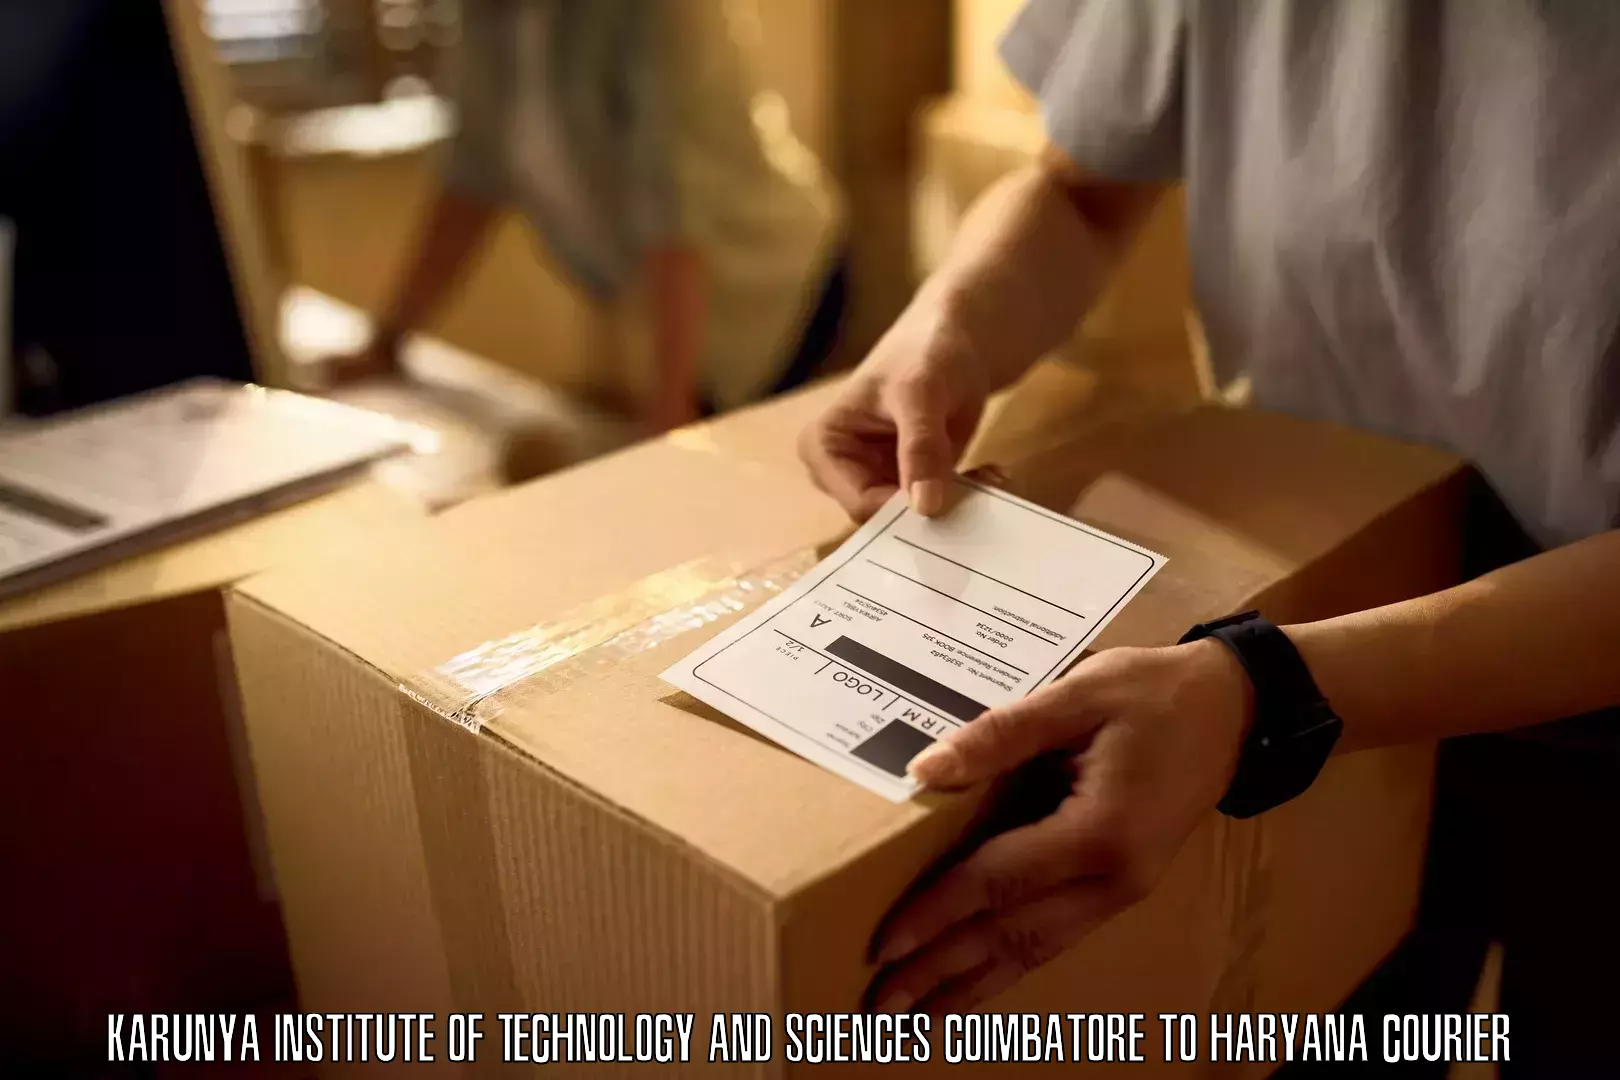 Global logistics network Karunya Institute of Technology and Sciences Coimbatore to Haryana